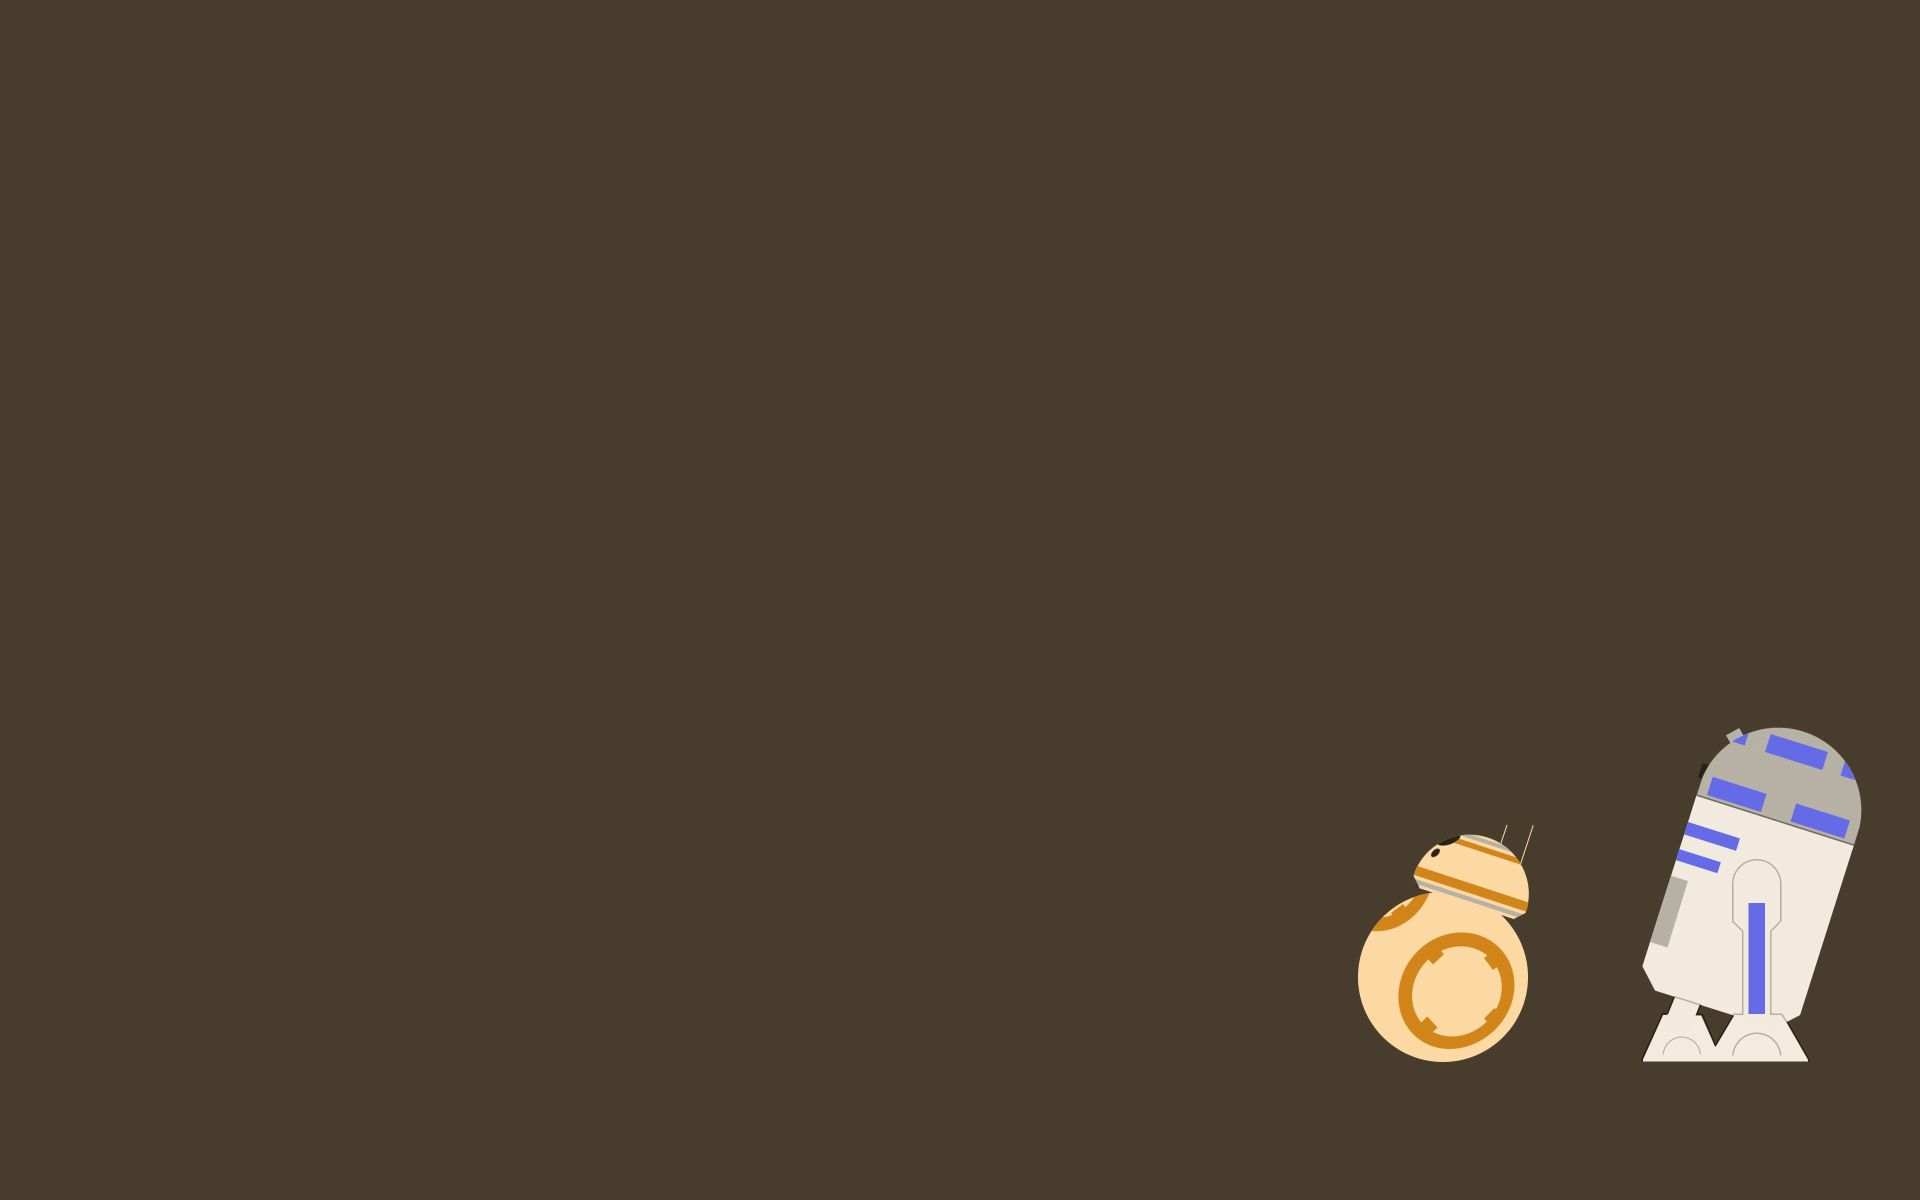 A brown background with R2D2 and BB8 on the right - Star Wars